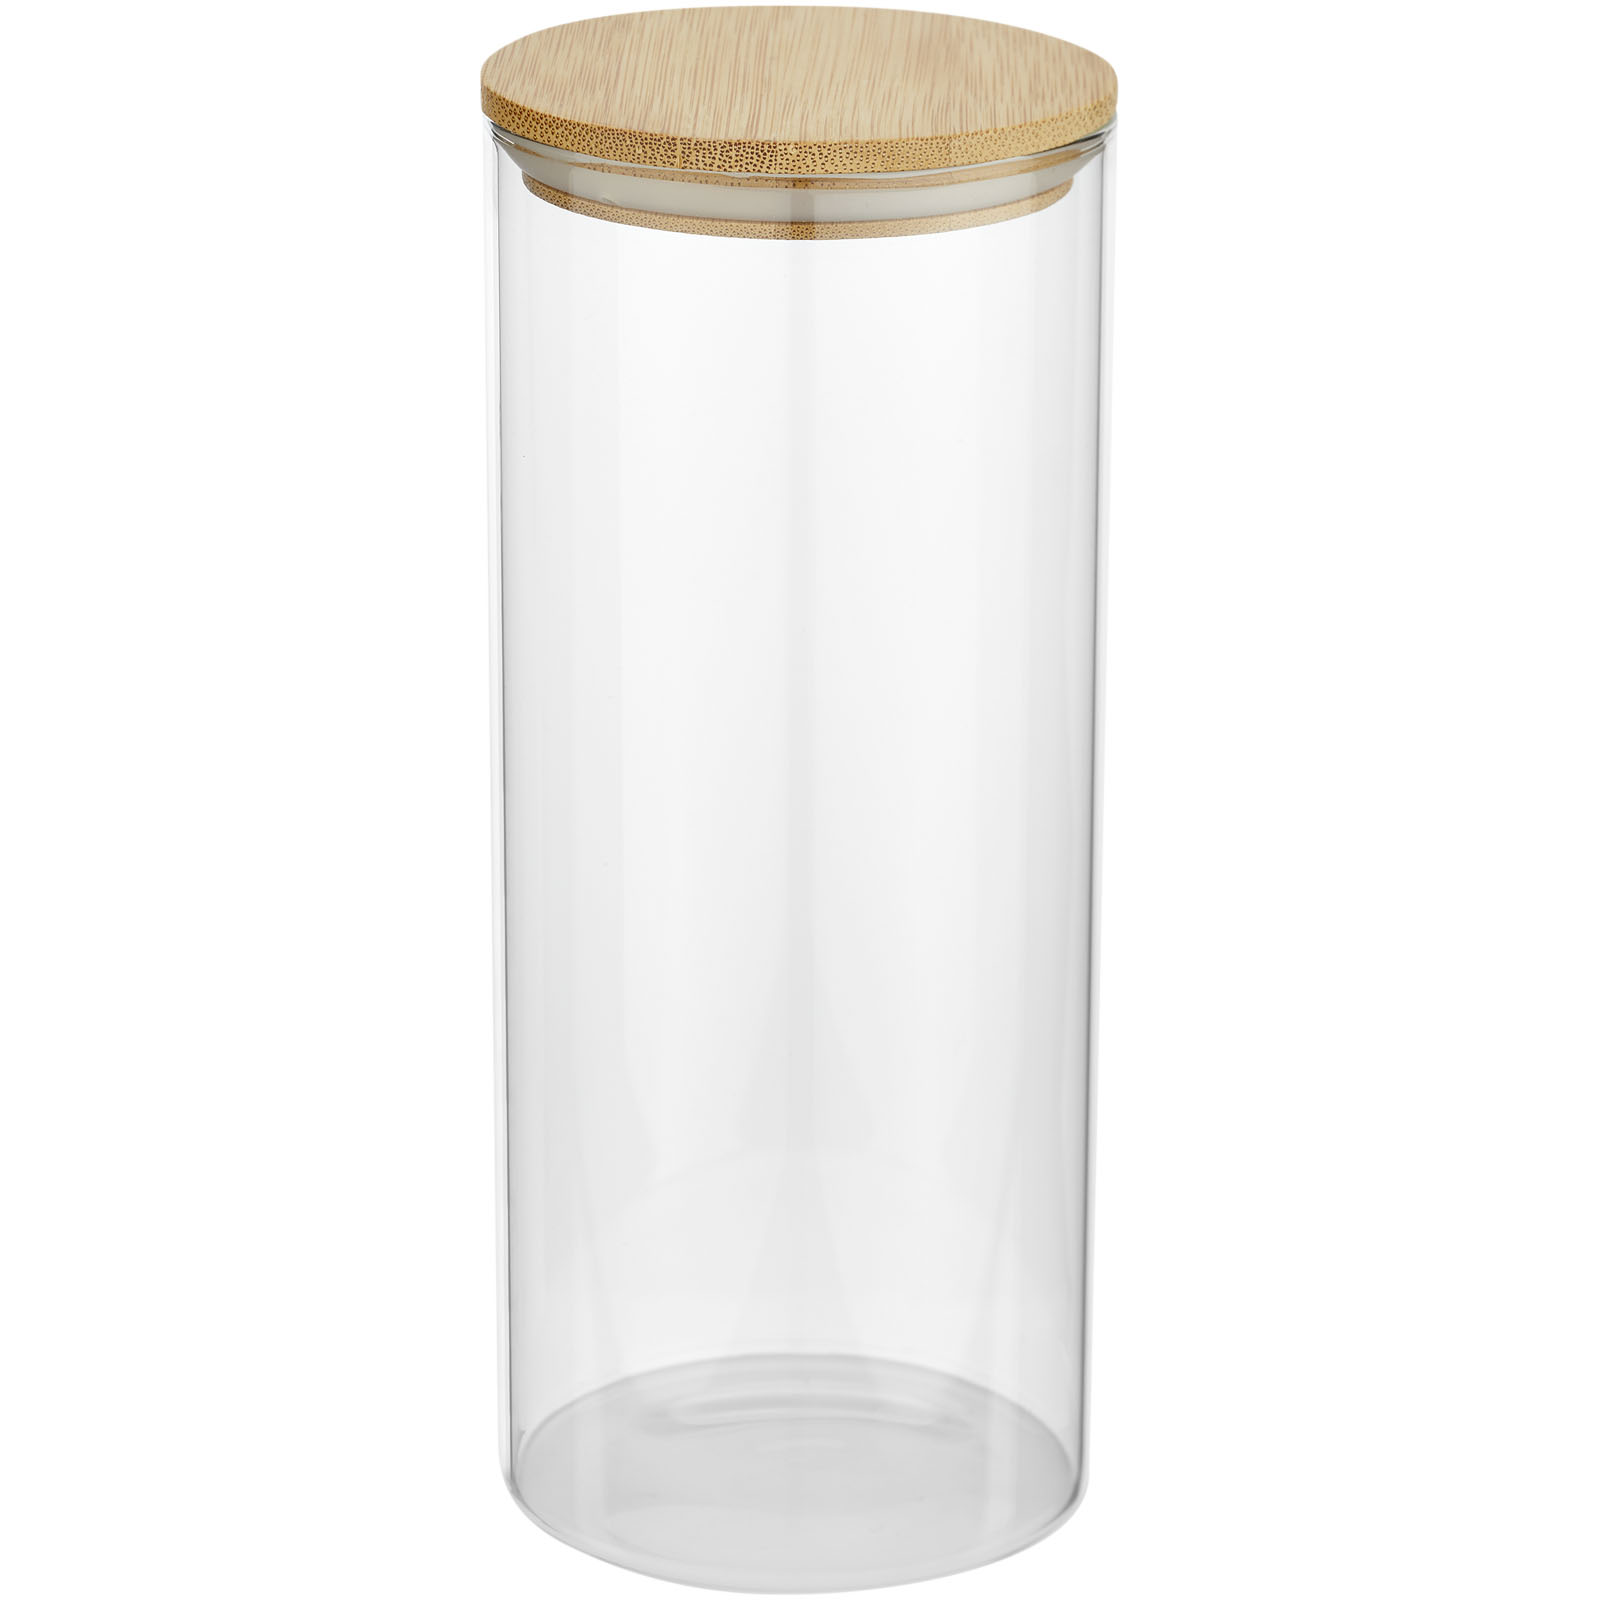 Home & Kitchen - Boley 940 ml glass food container